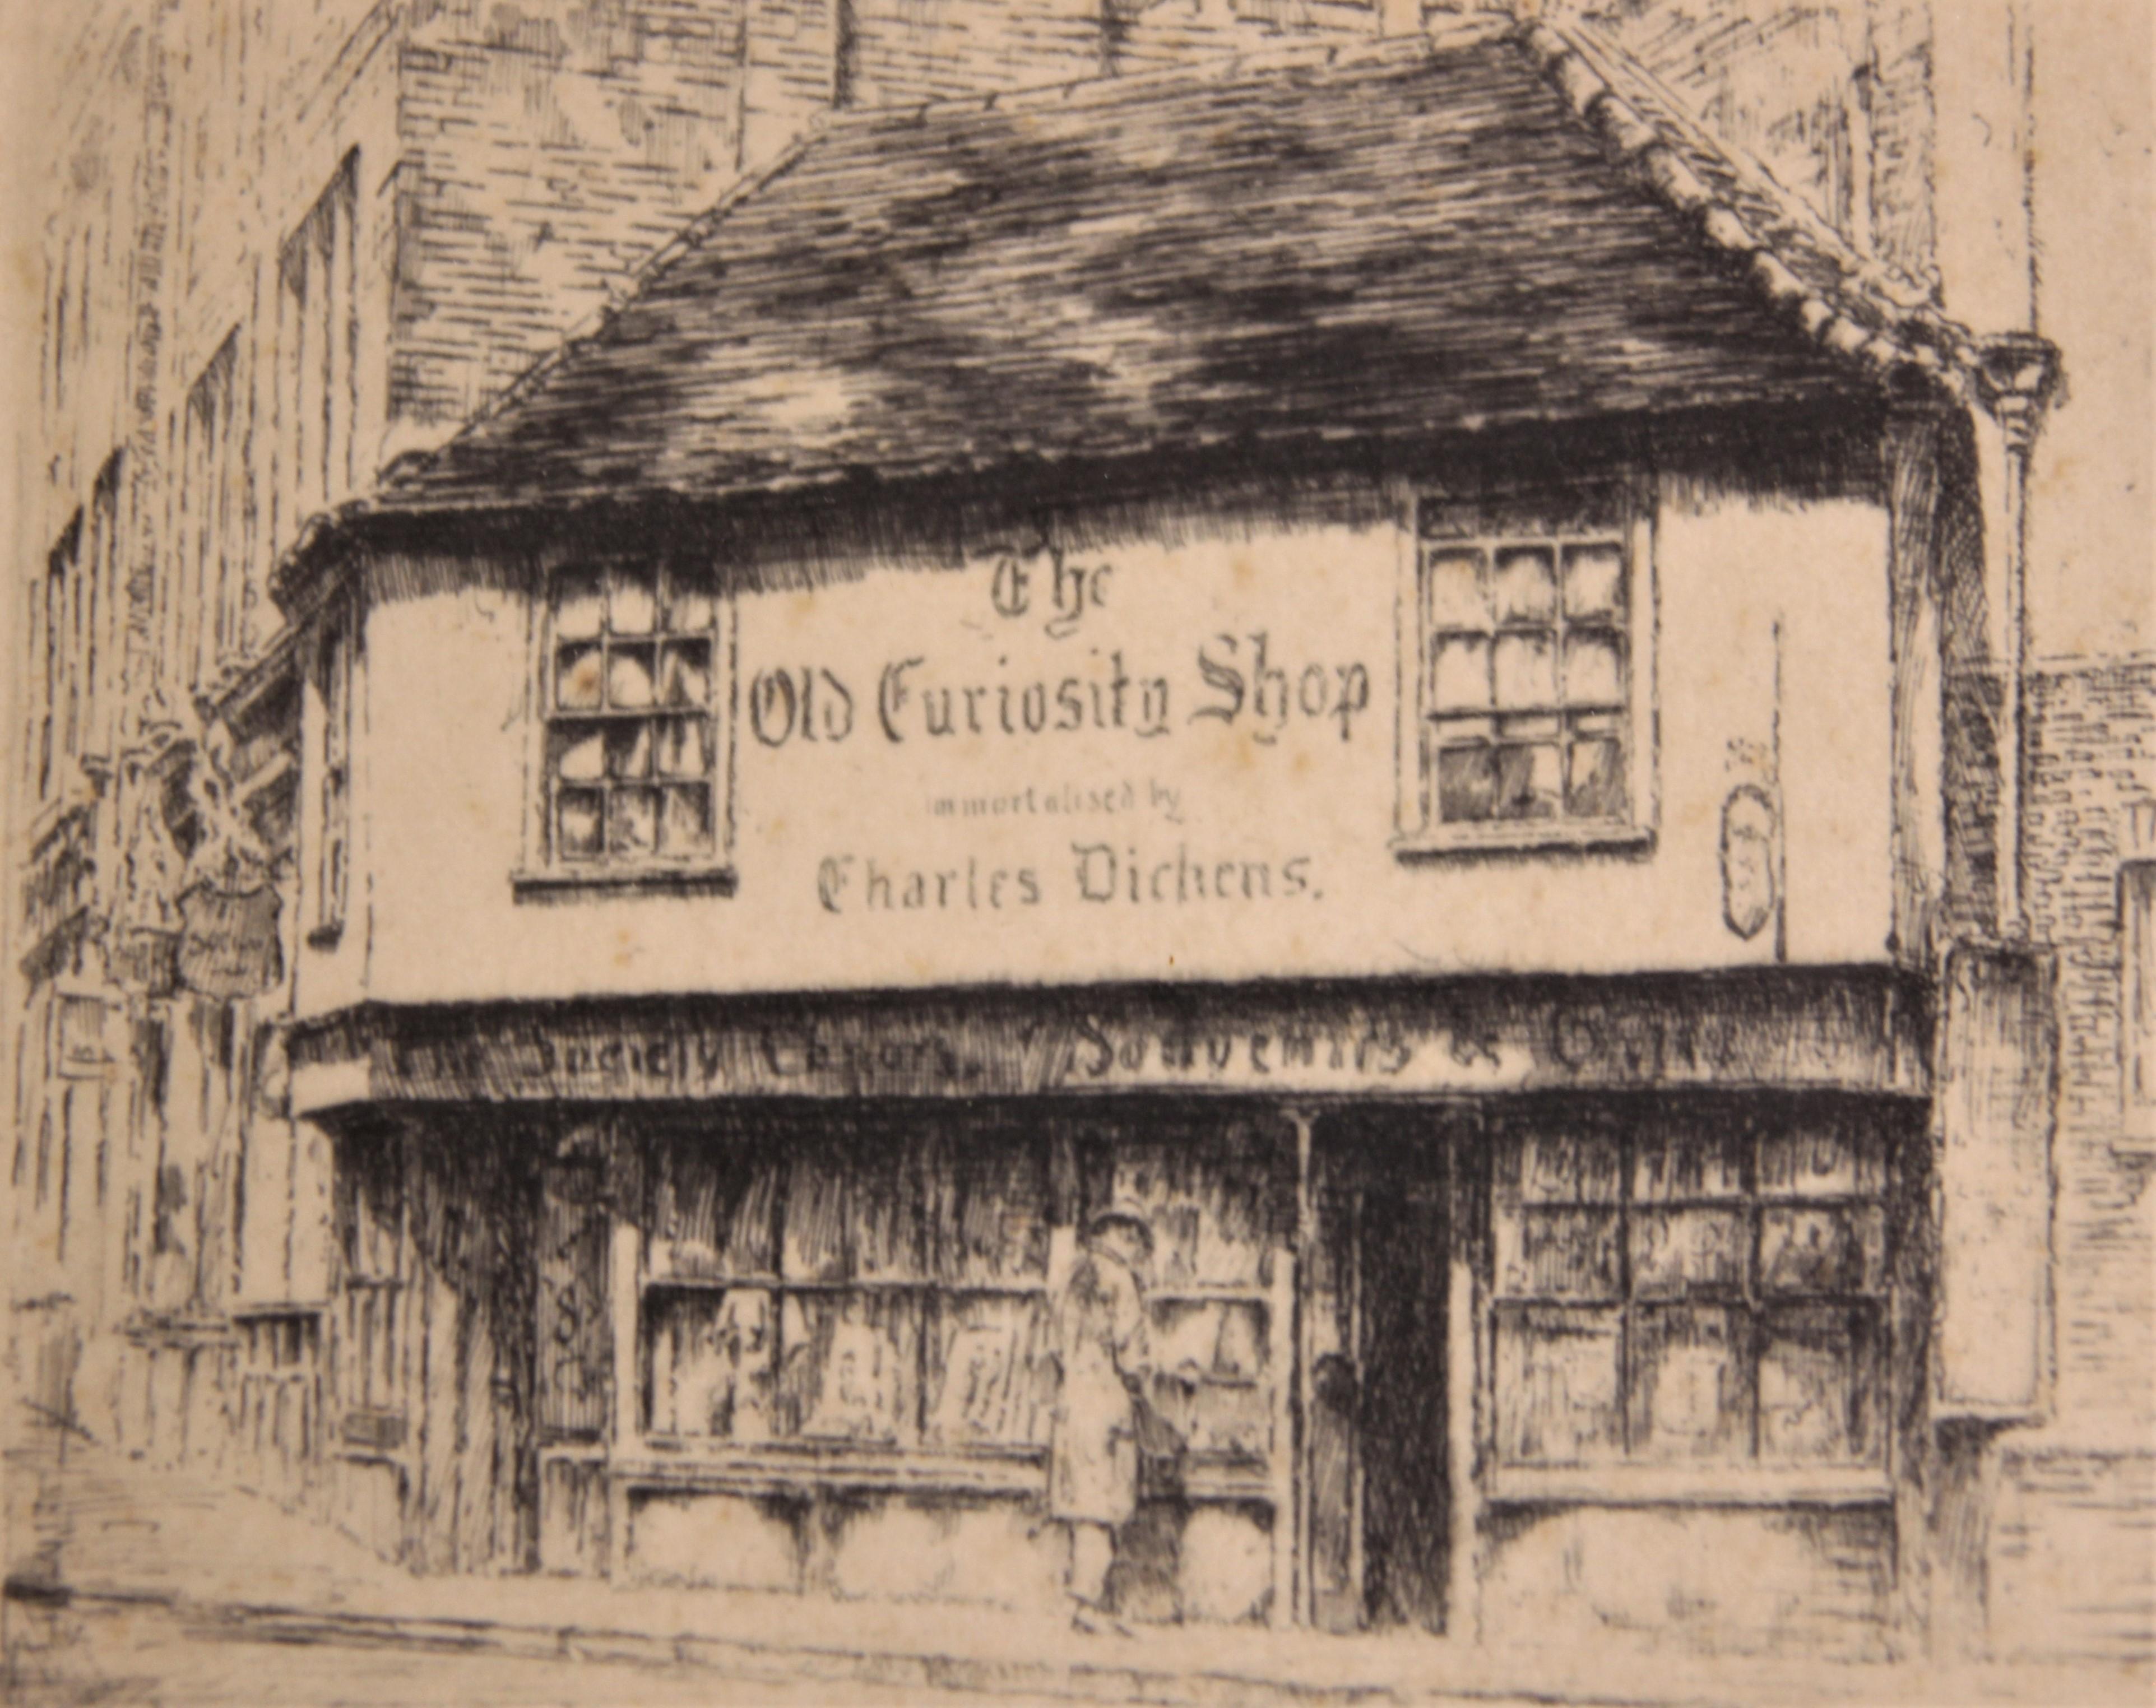 The Old Curiosity Shop Immortalized by Charles Dickens Realist Landscape Etching - Print by Edward J. Cherry